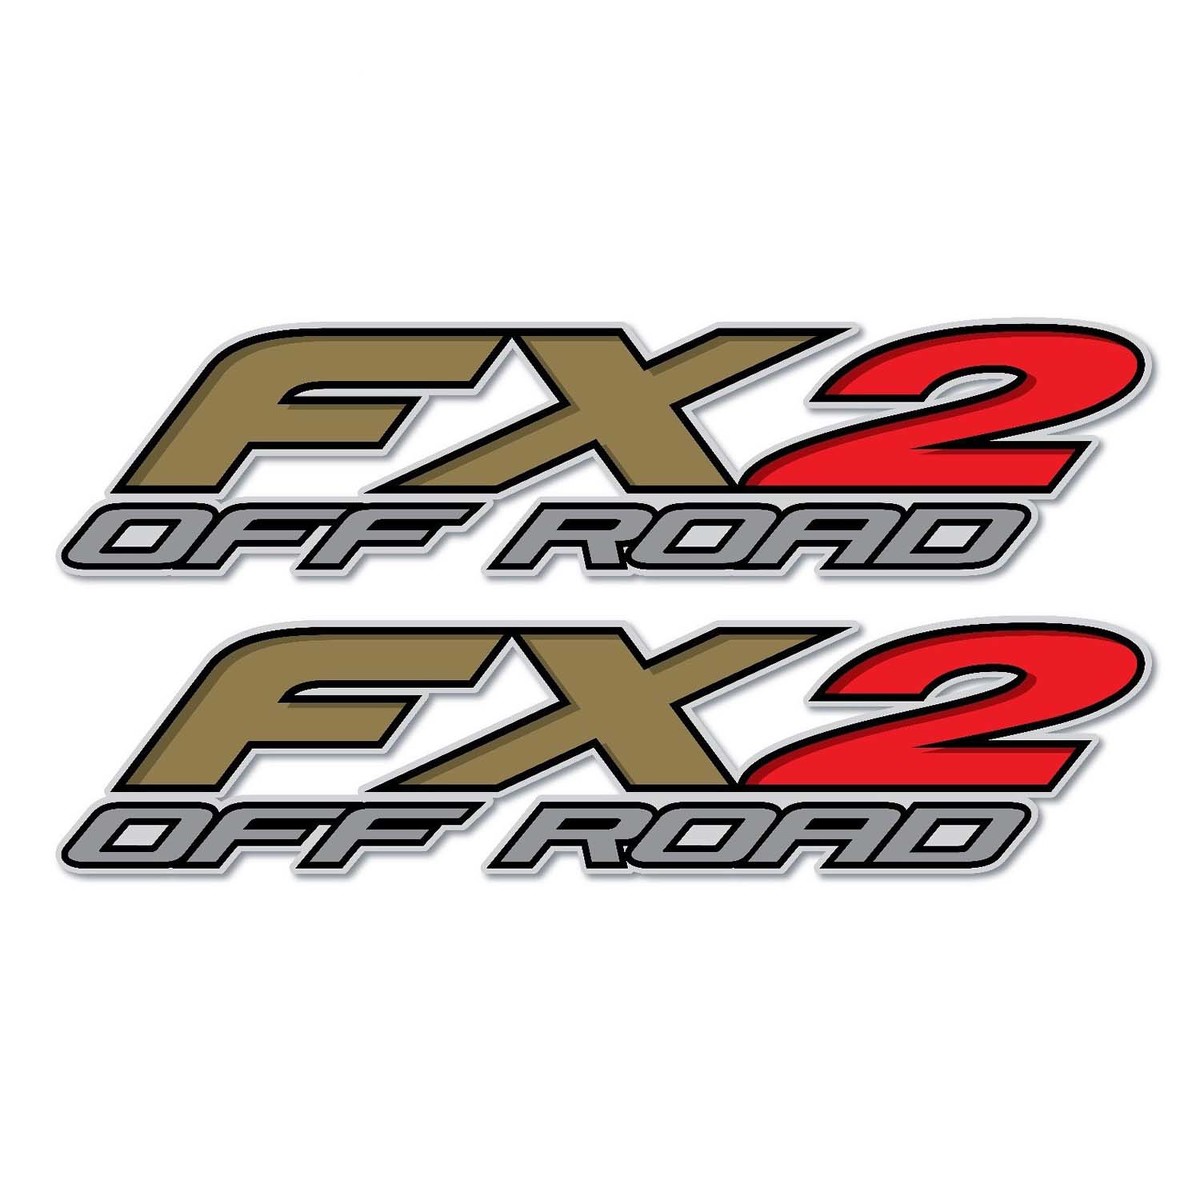 Set of 2: FX2 Off Road truck bed side vinyl decal sticker auto car